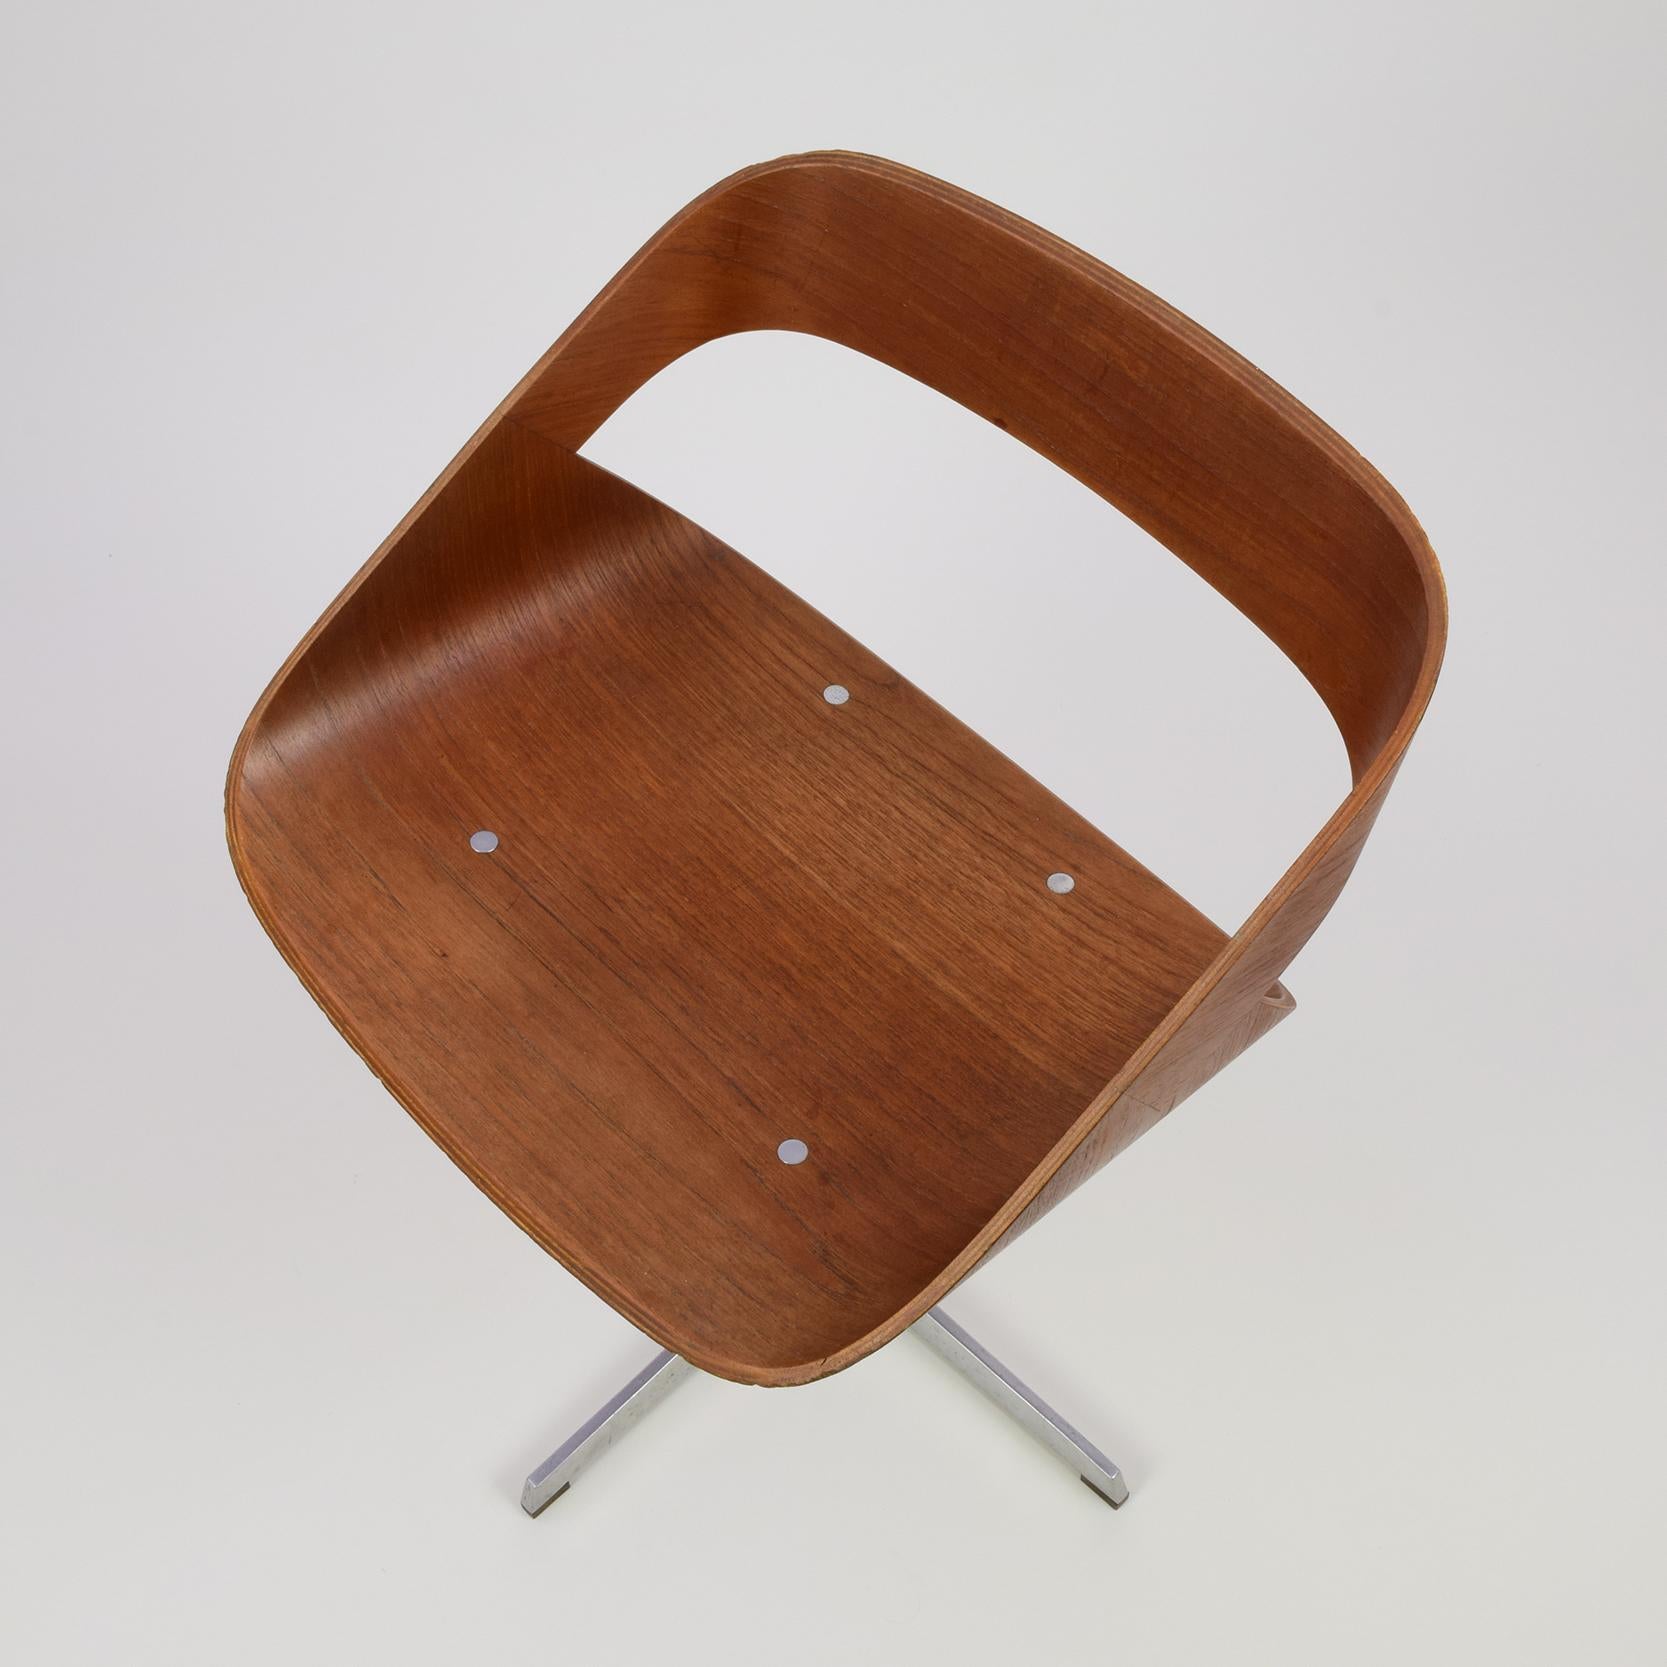 Geoffrey Harcourt, Chair 130, 'RCA' Chair, Designed 1960, Produced by Artifort For Sale 2